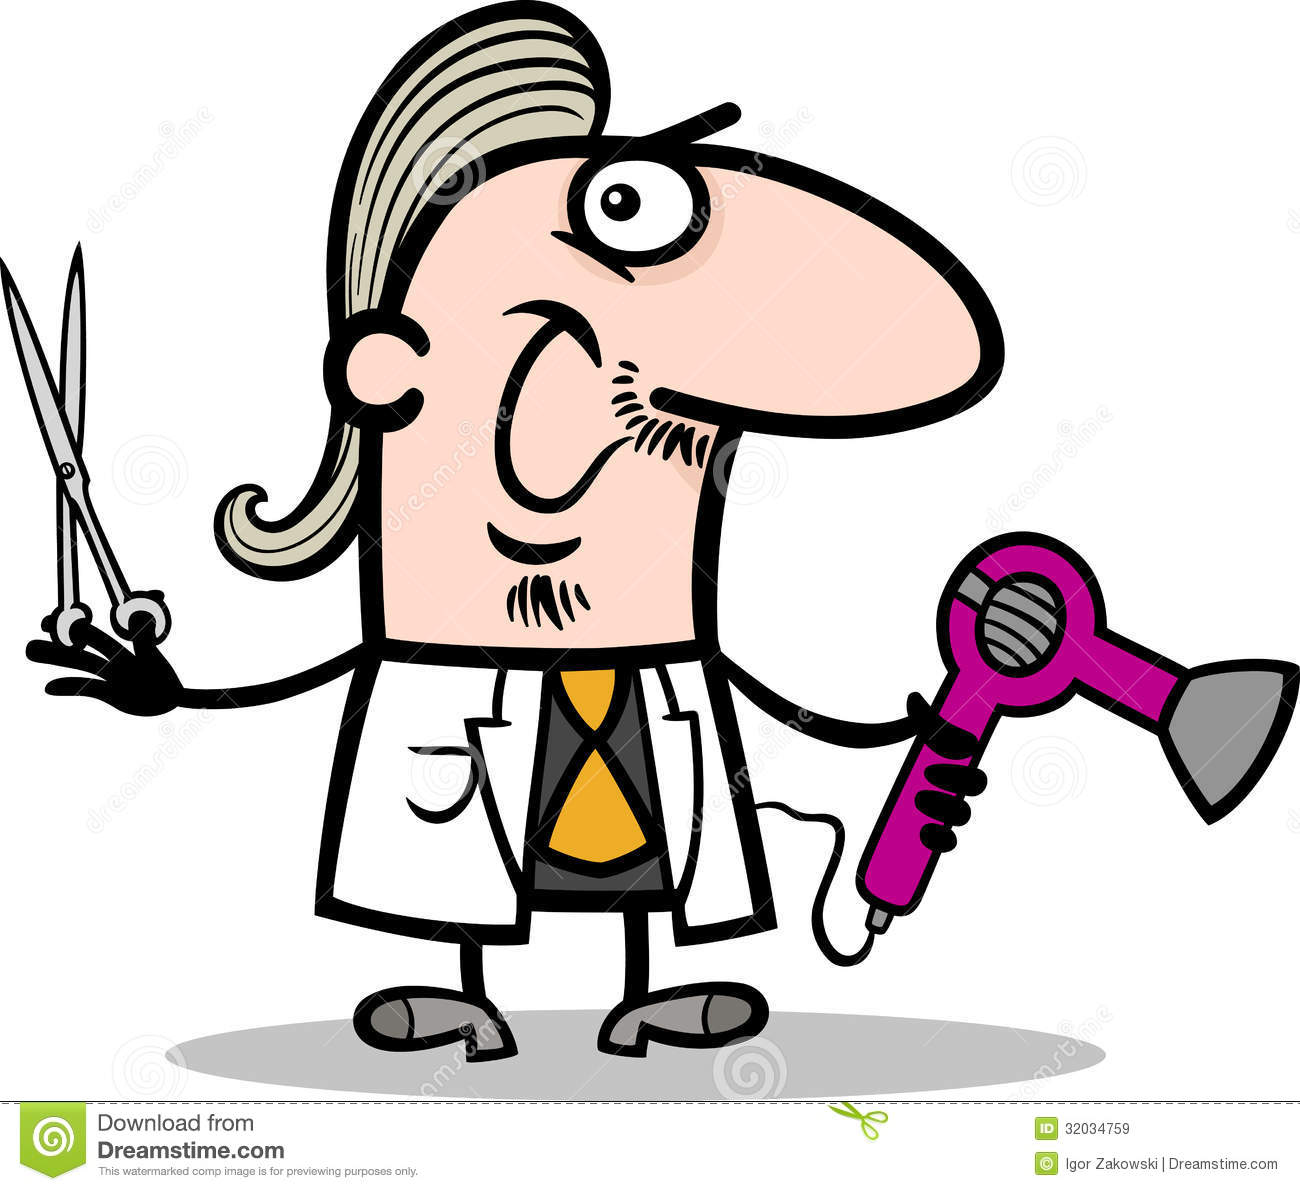 Cartoon Illustration Of Funny Hairdresser Or Barber With Scissors And